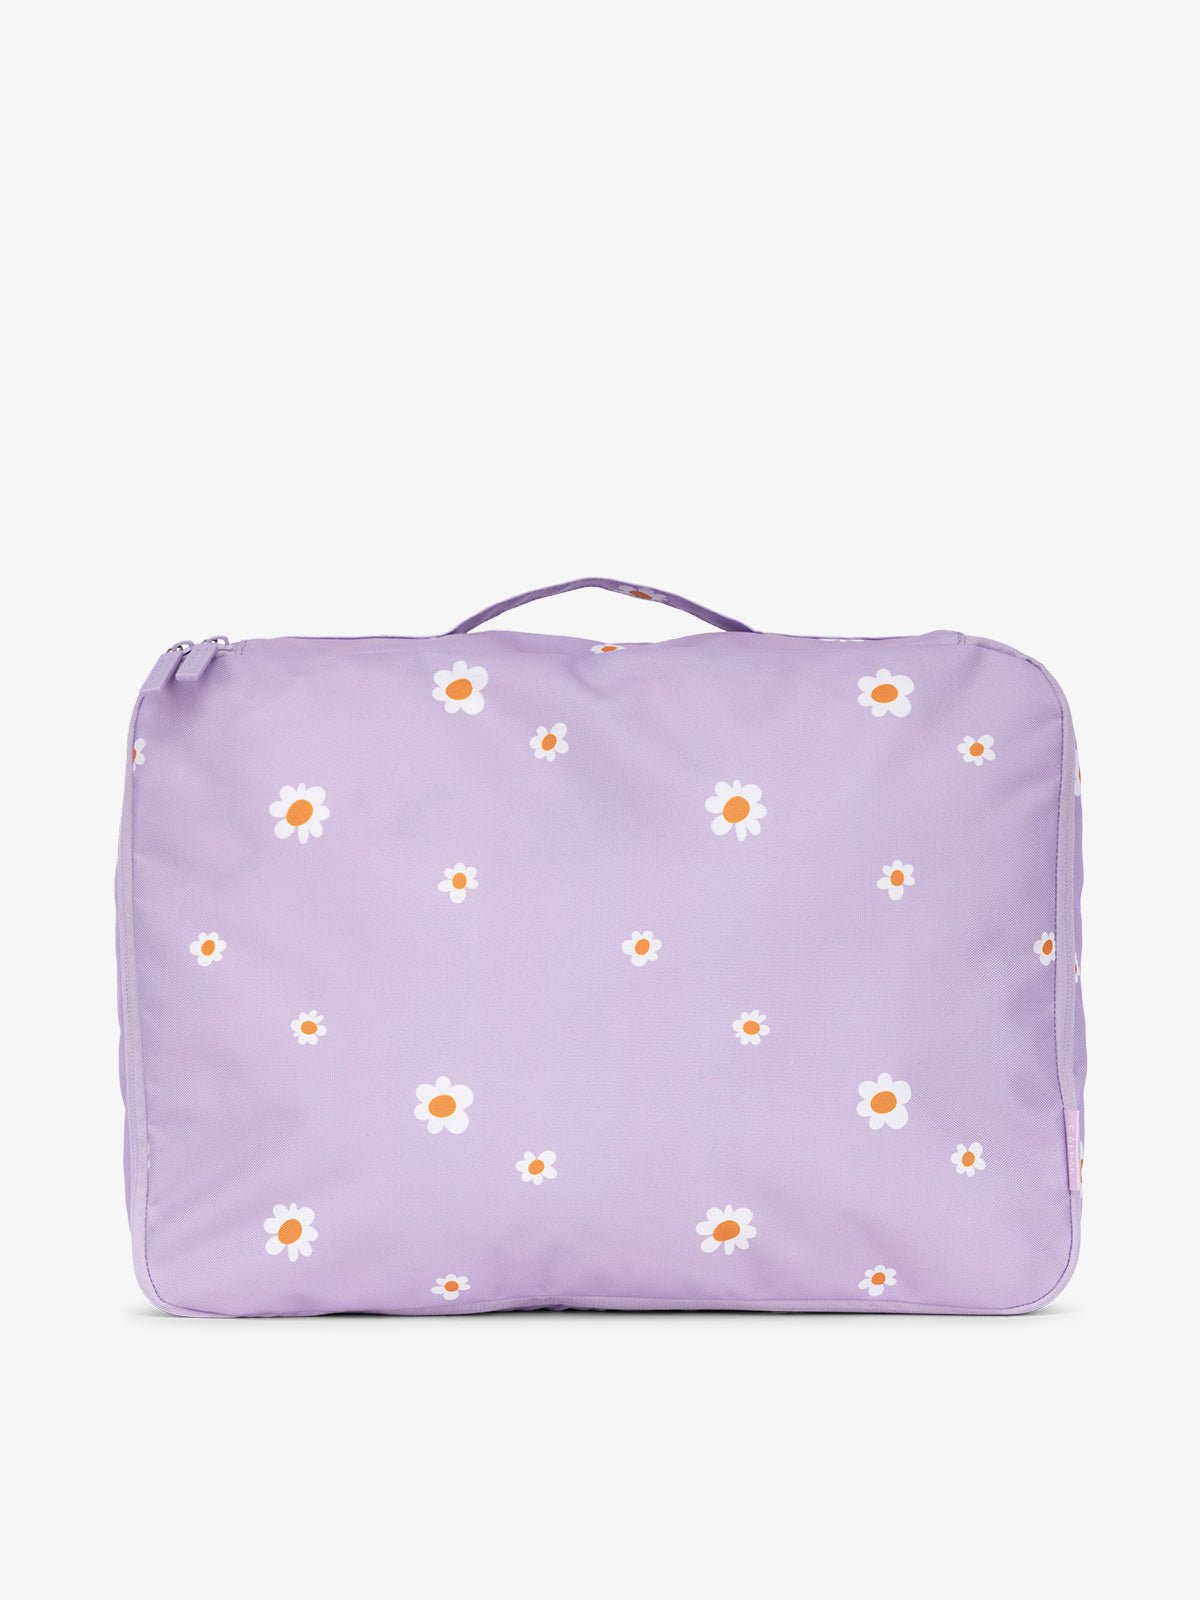 CALPAK large packing cubes with top handle in lavendar floral print